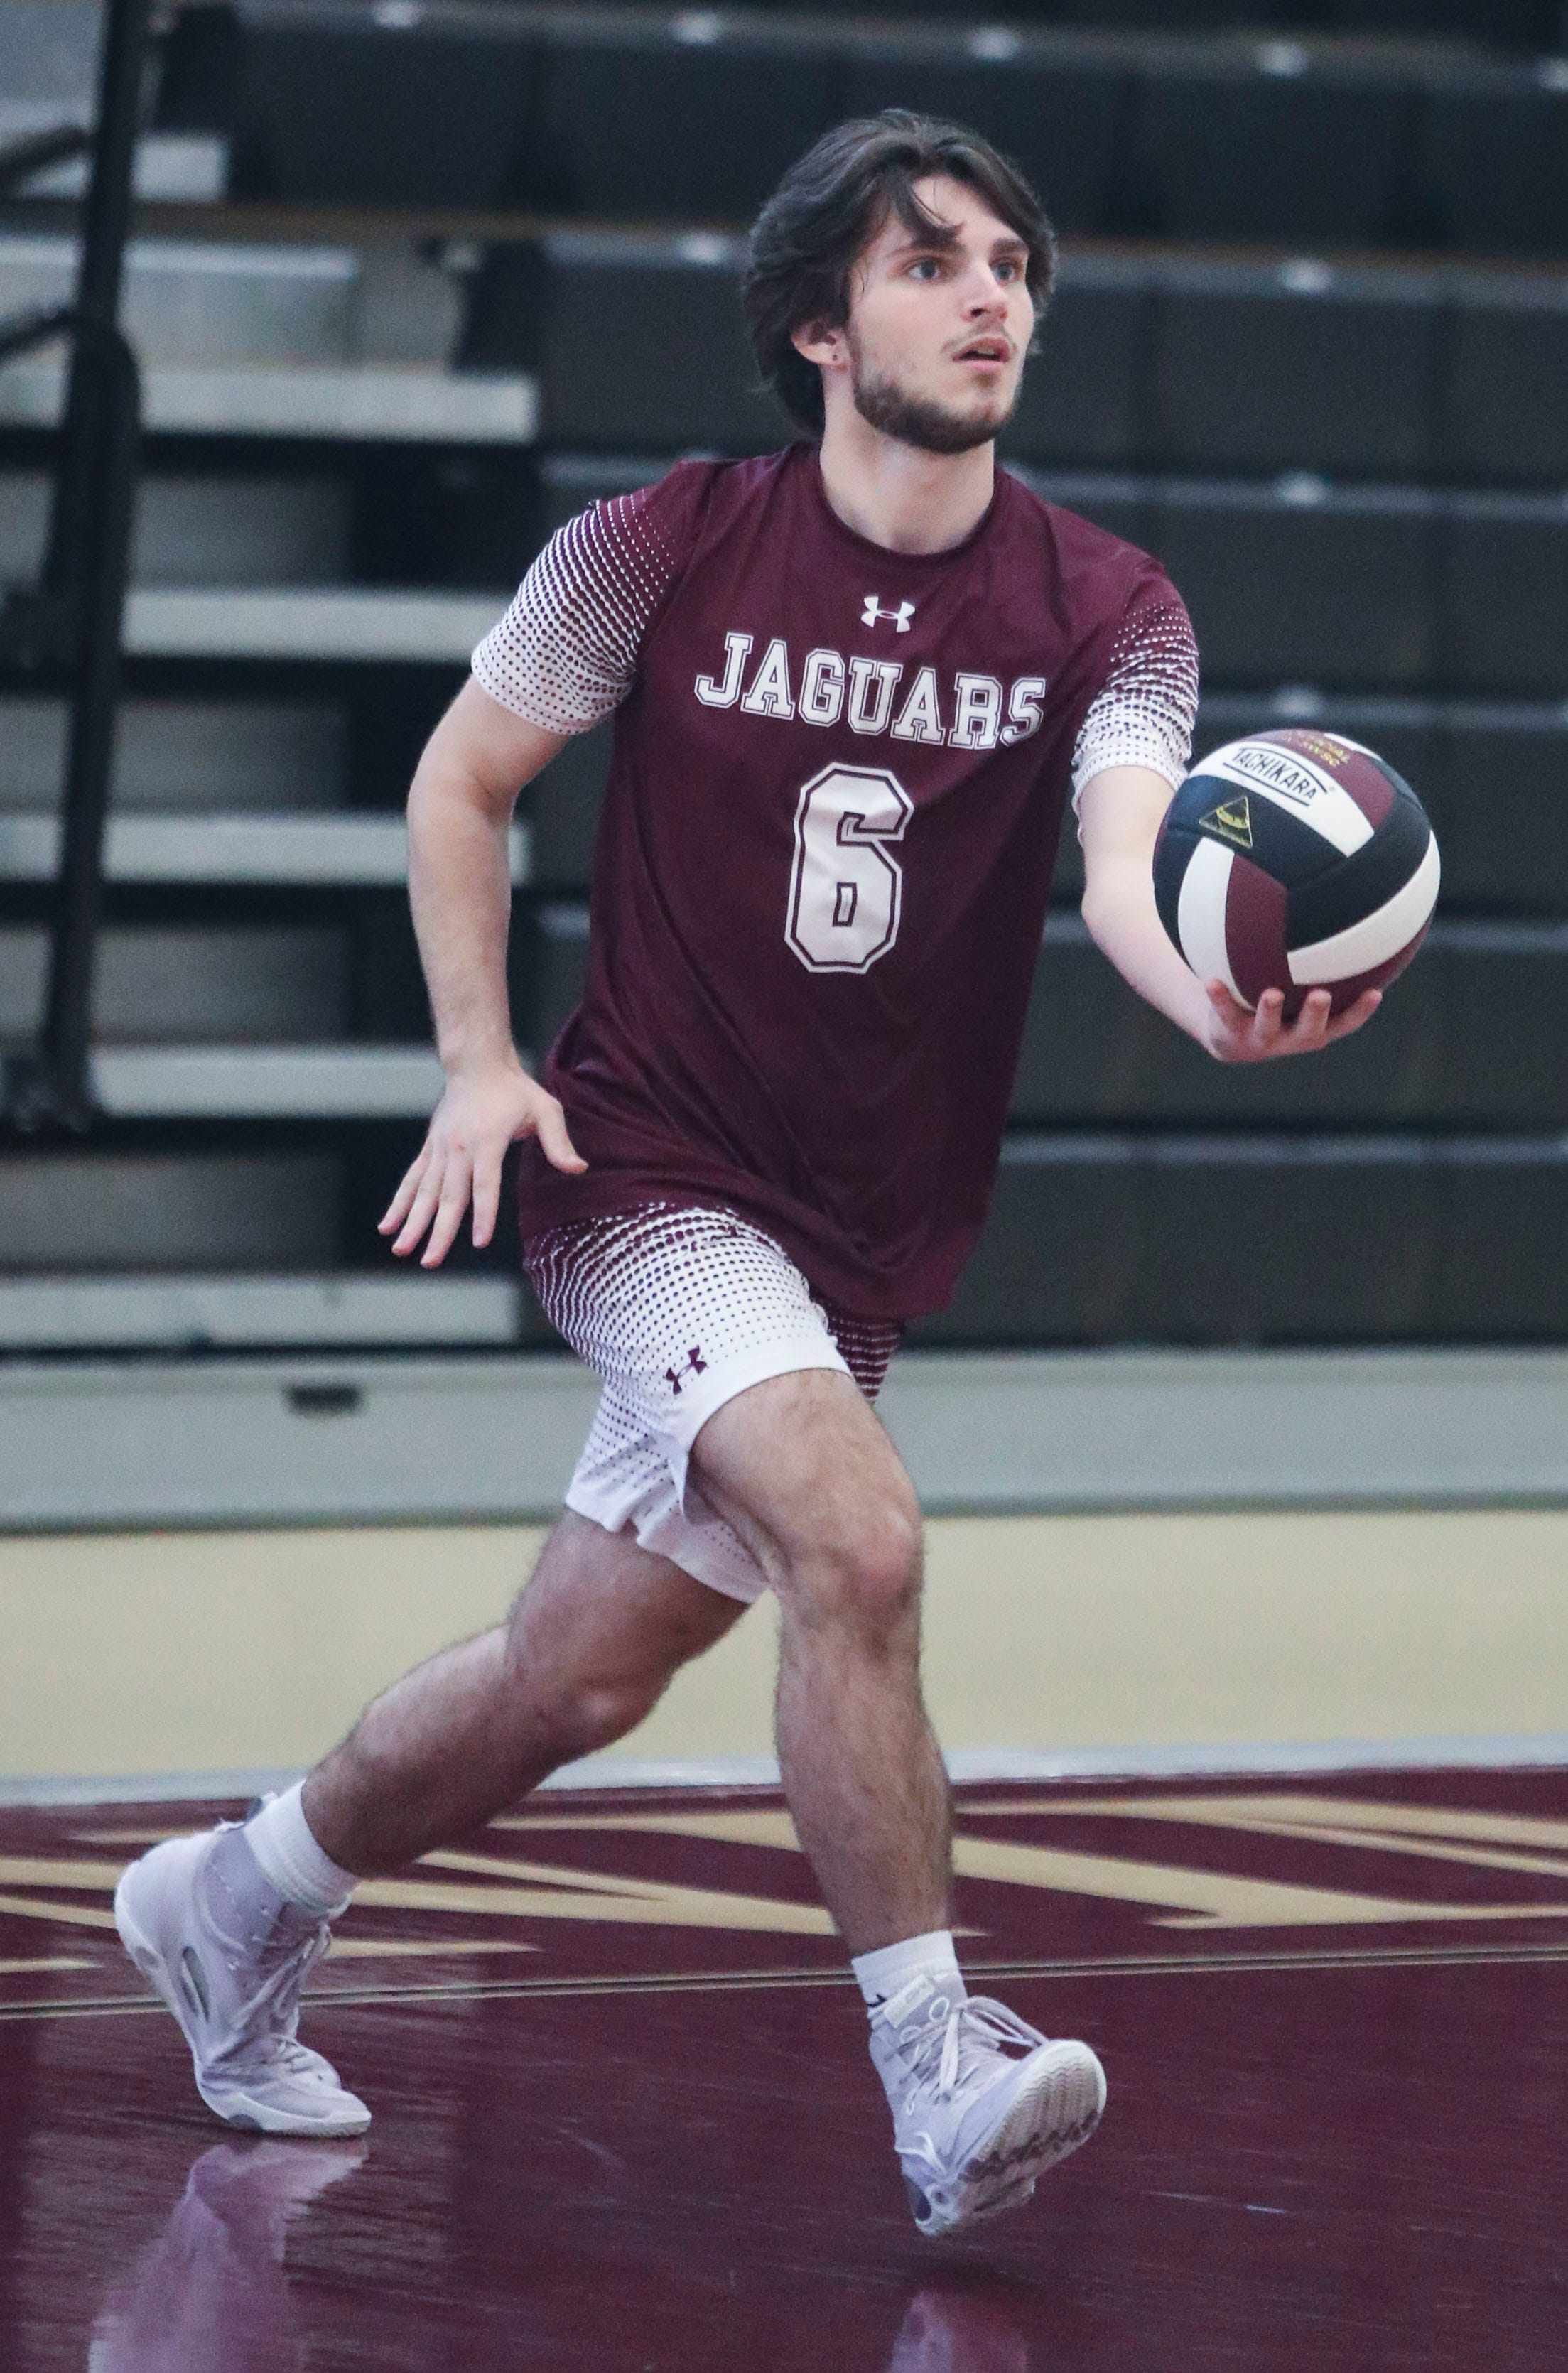 Appoquinimink's Dominick Volpe steps into a serve in the Jaguars' 3-0 win against Delaware Military at Appoquinimink, Wednesday, March 27, 2024.